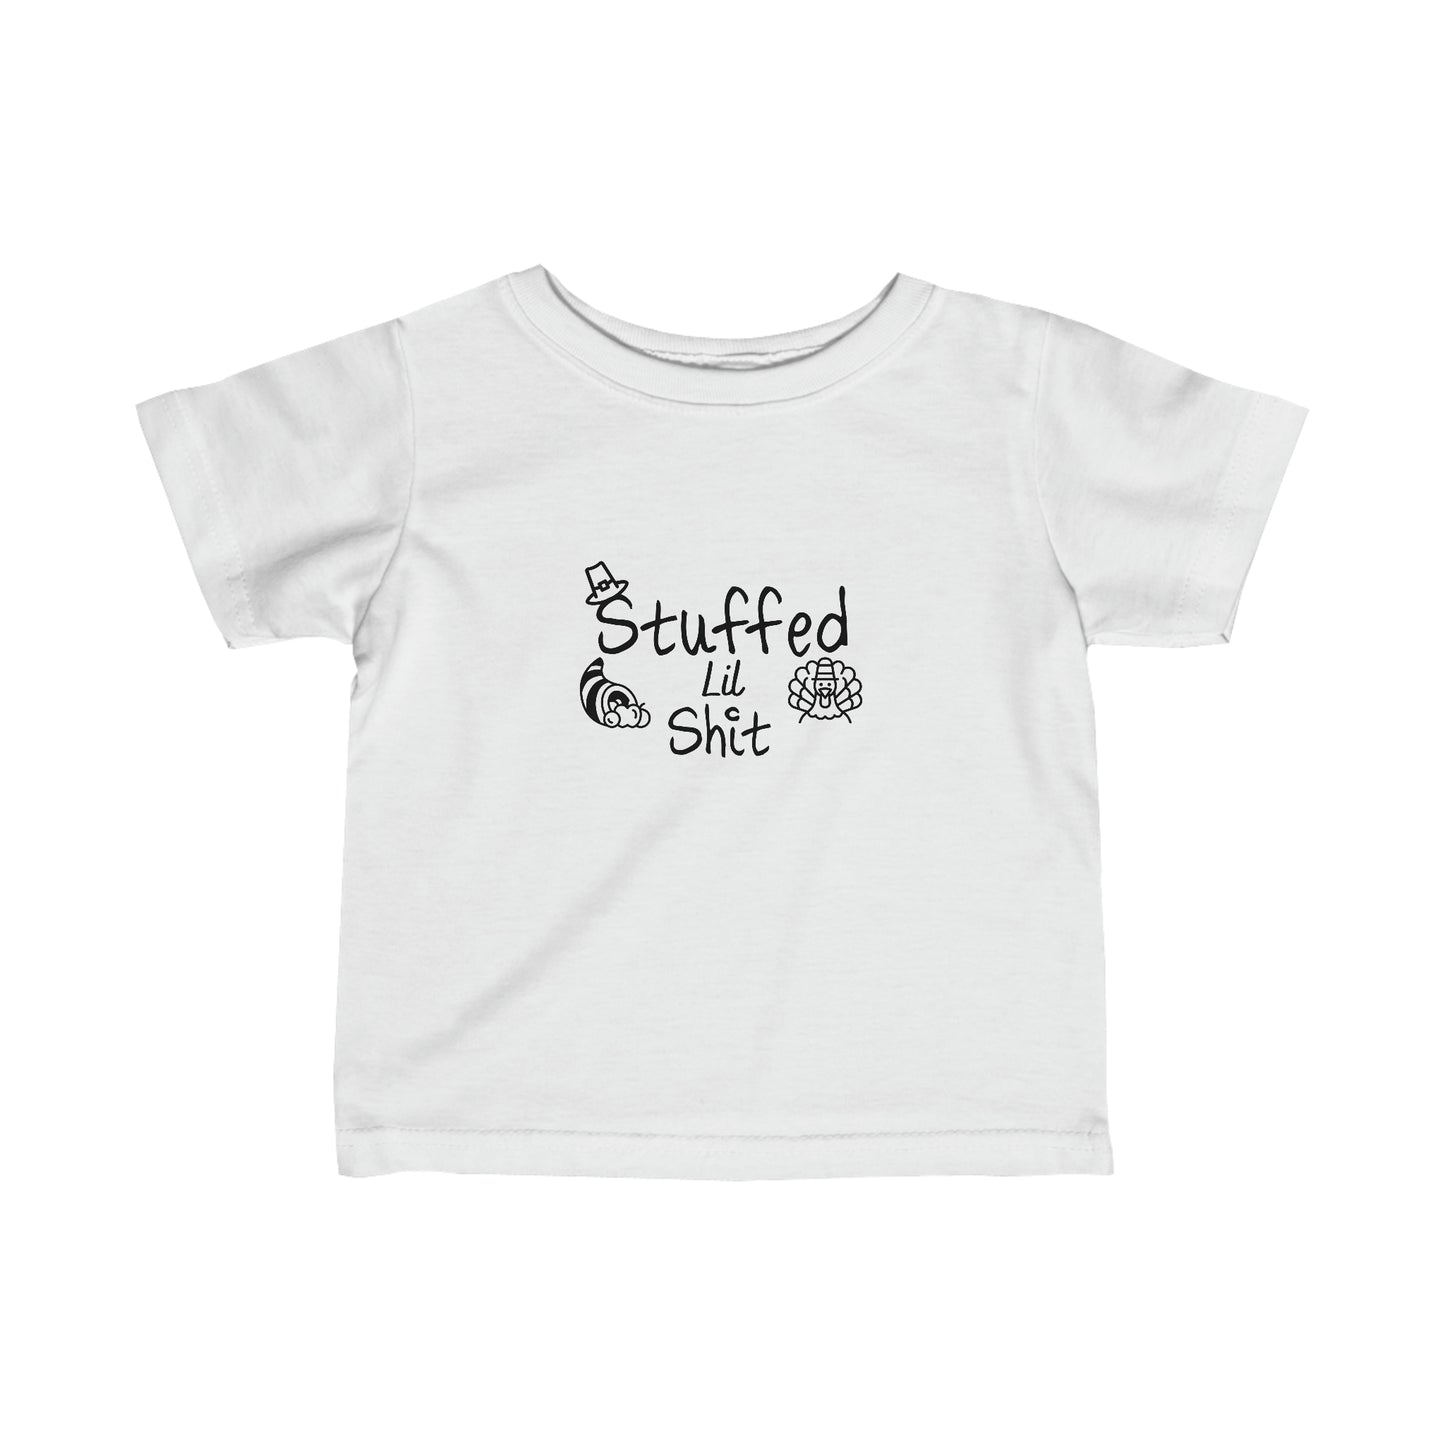 Infant Holiday Tee, Toddler Holiday T-Shirt, Stuffed Shirt for Toddlers, 6-24M